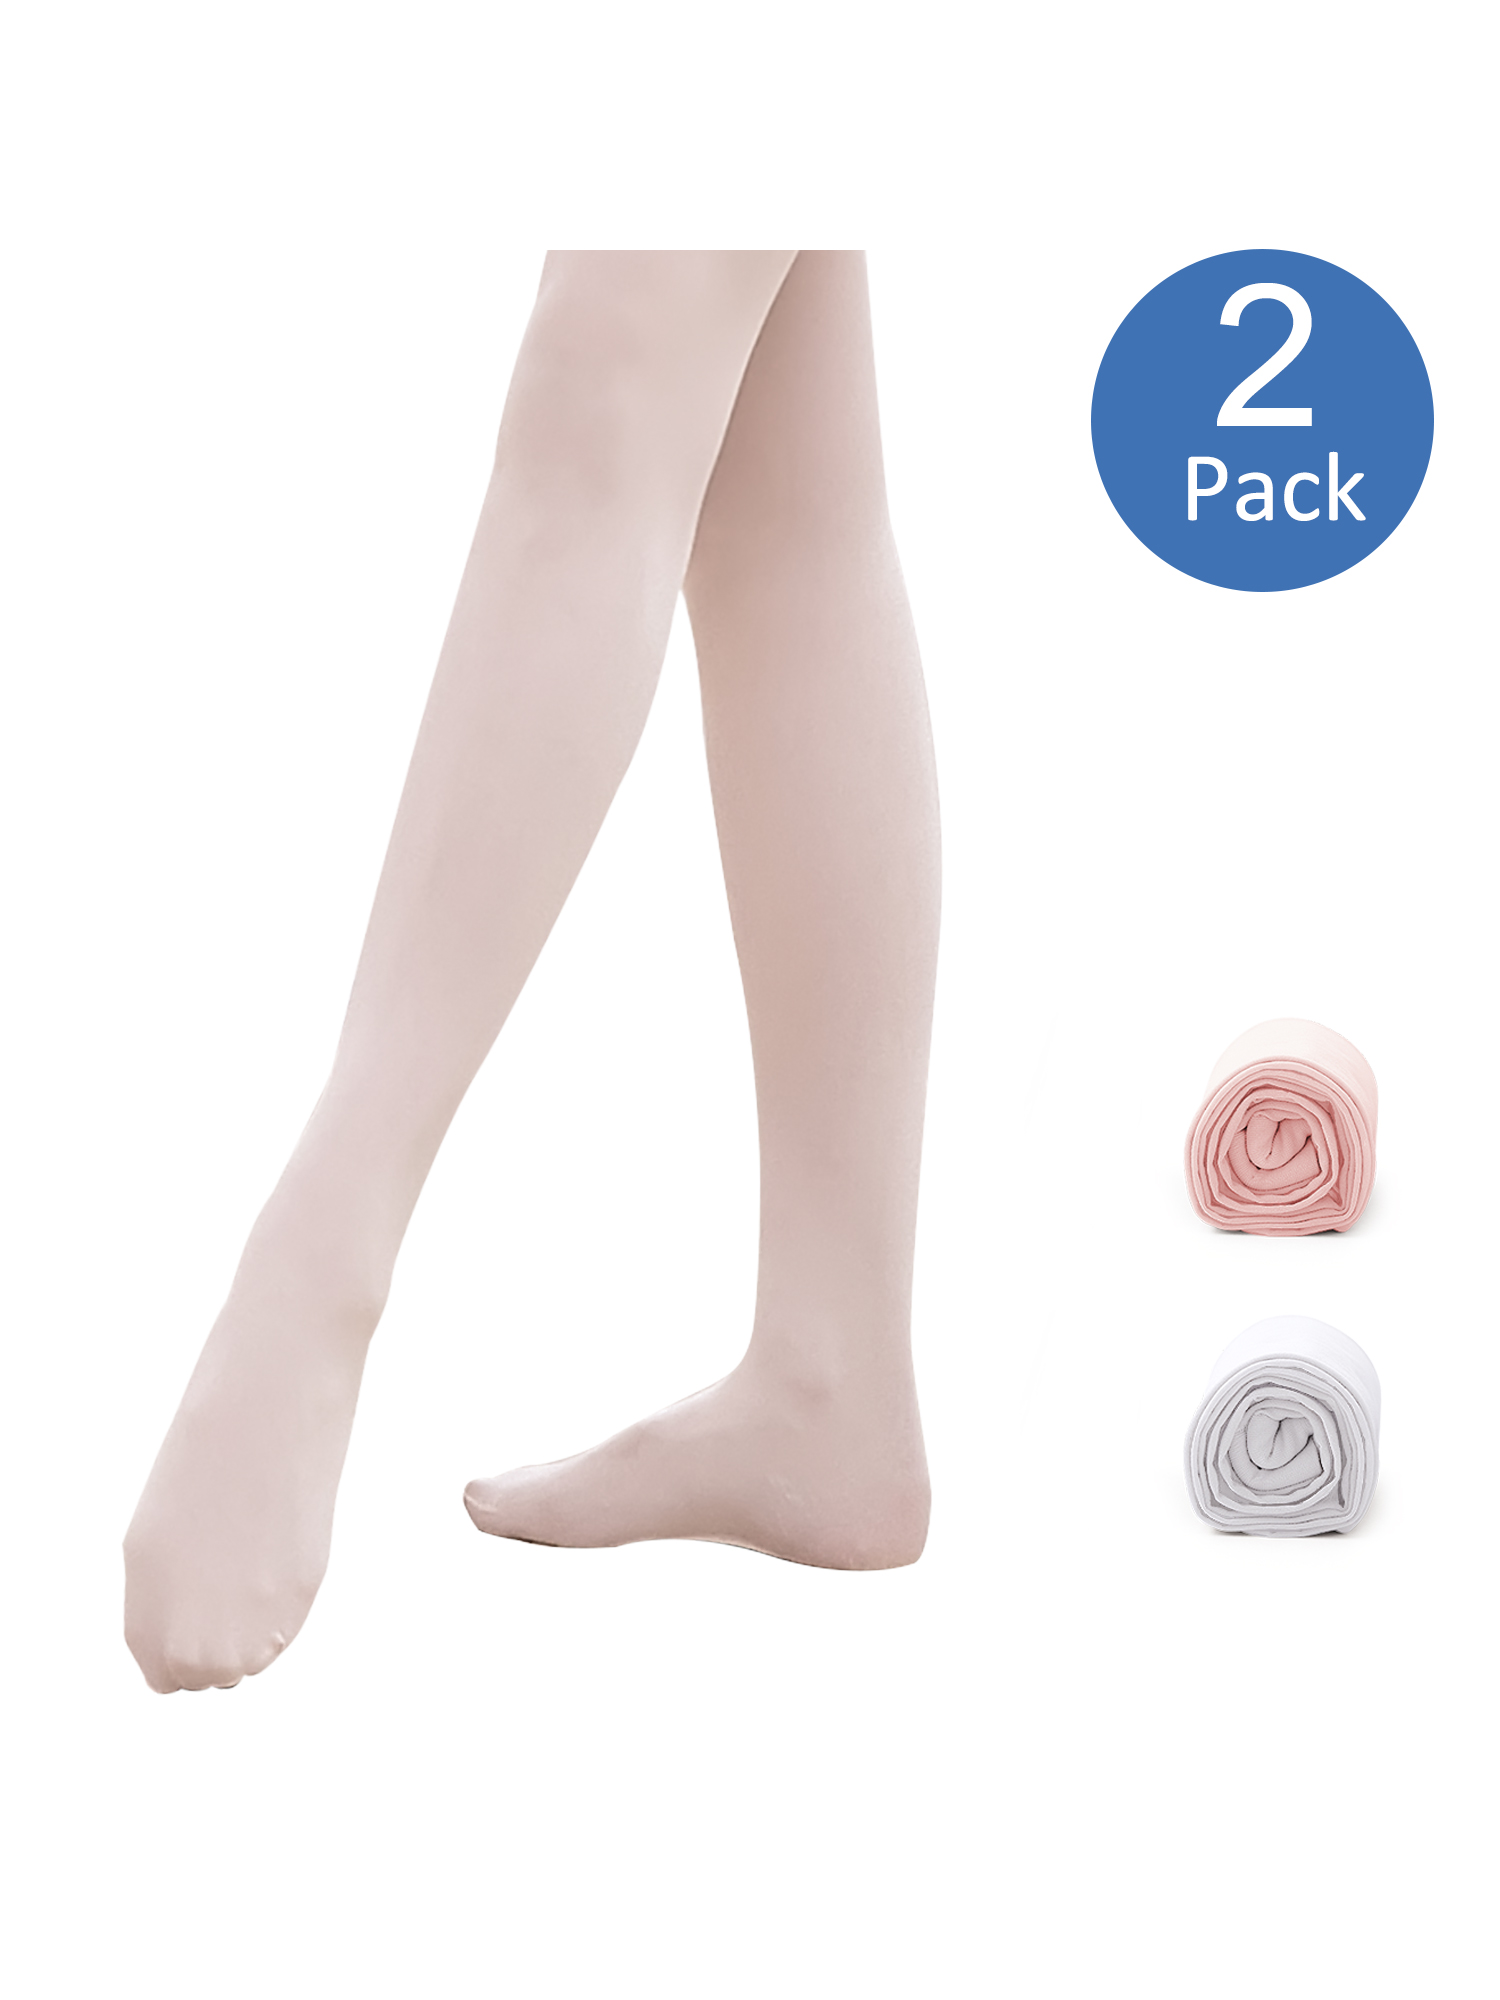 Ballet Tights for Girls Footed dance Tights for Kids Women Soft /& Stretch Pink Black White